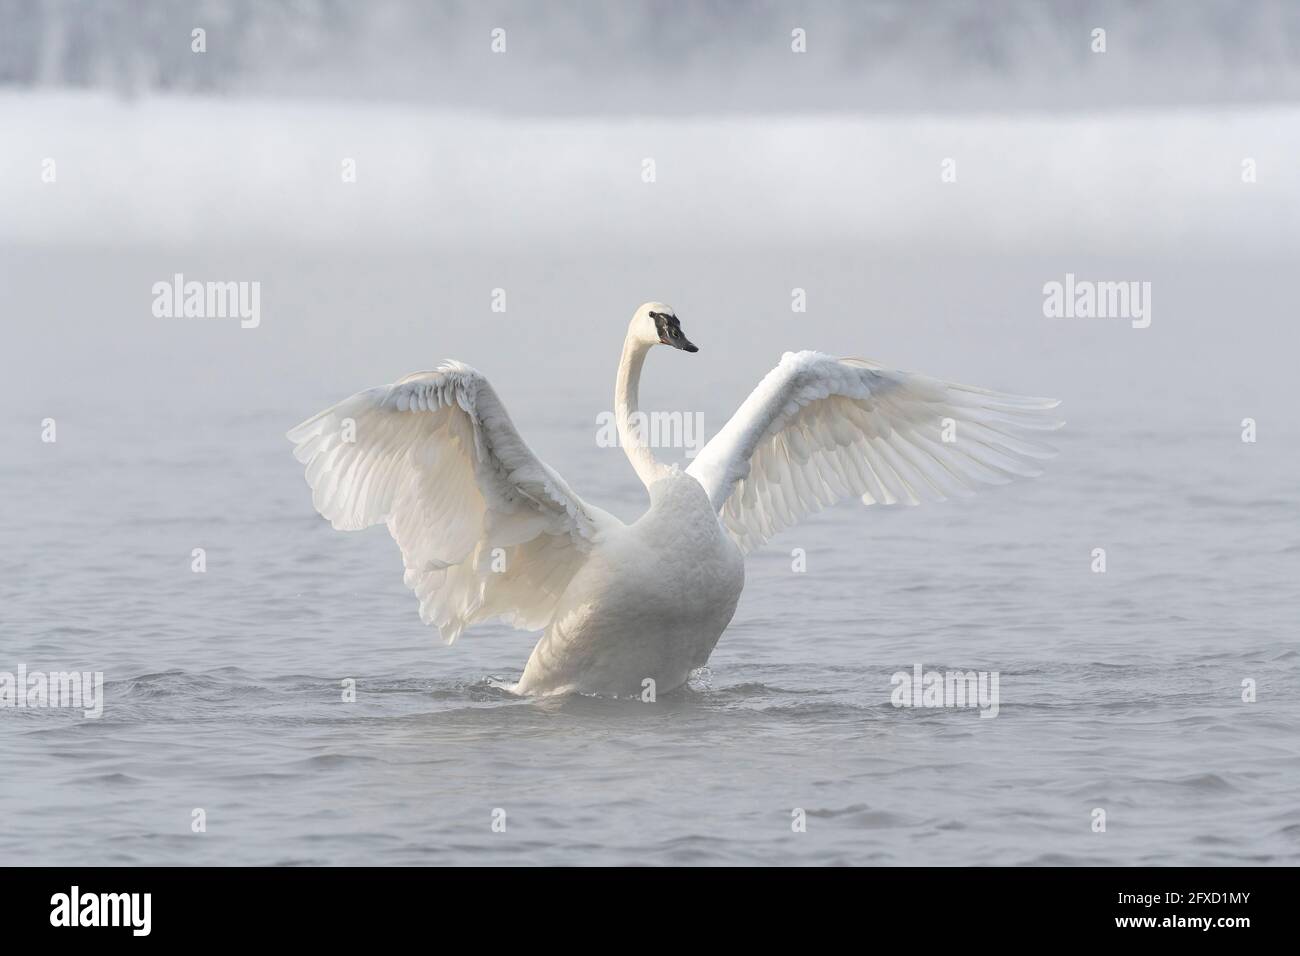 Trumpeter swan stretching its wings (Cygnus buccinator), Winter, St. Croix River, WI, USA by Dominique Braud/Dembinsky Photo Assoc Stock Photo